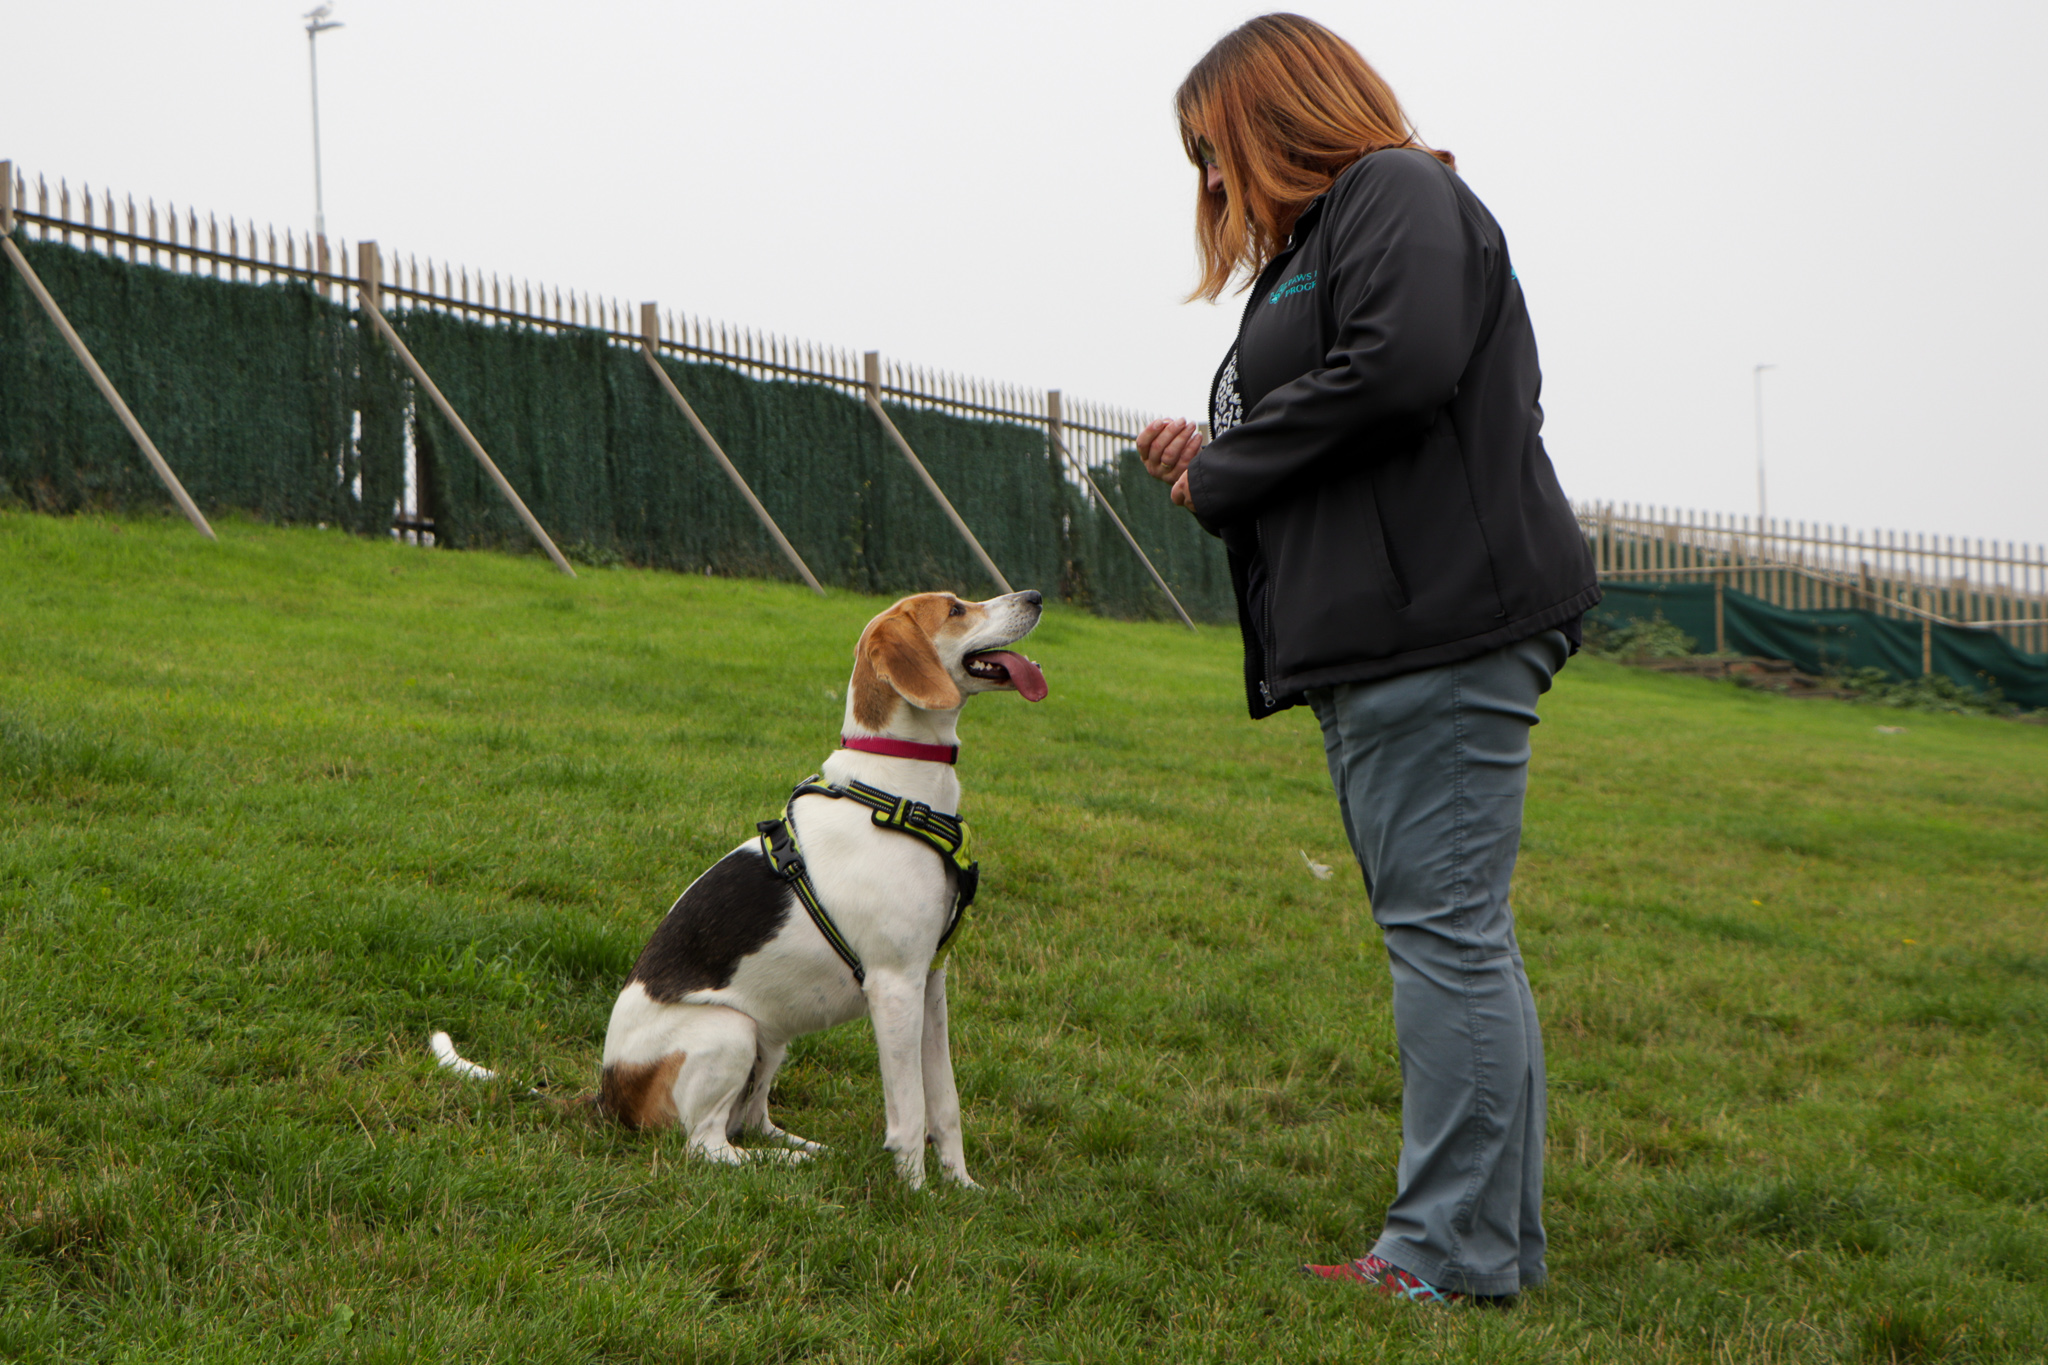 Lola (rehomed) and June McPhillips, Training Instructor at Paws for Progress